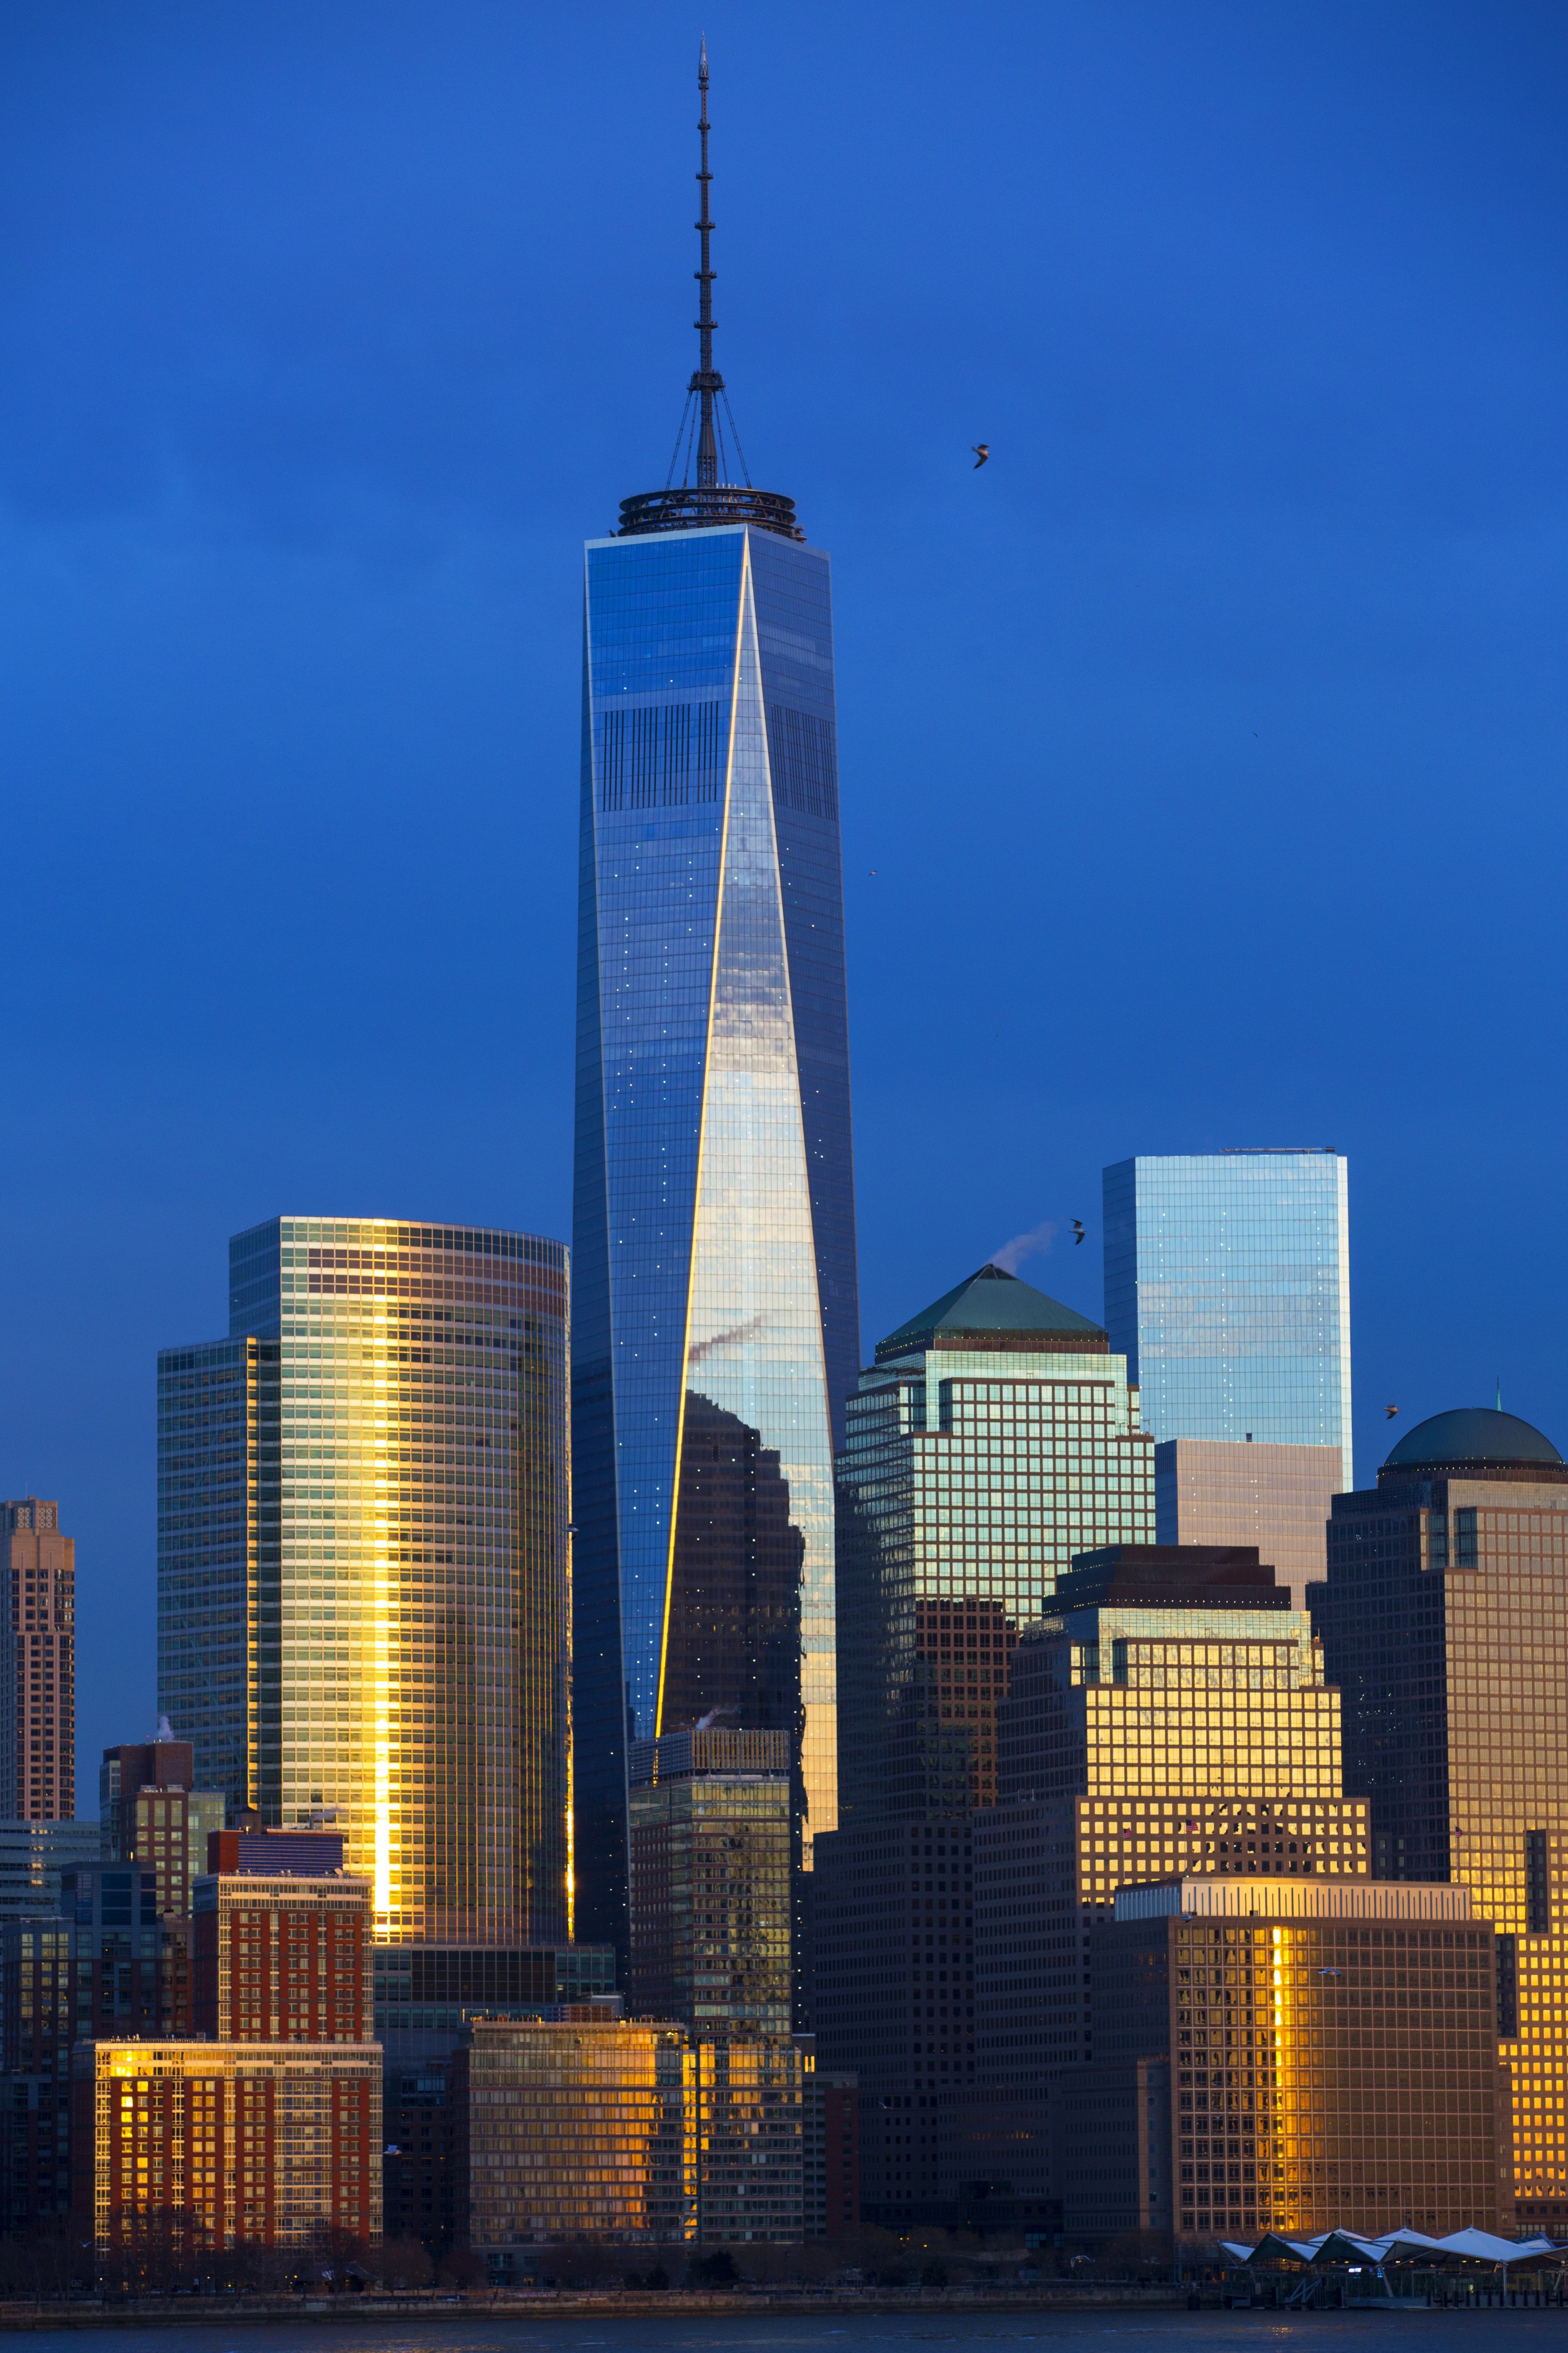 View to One World Trade Center